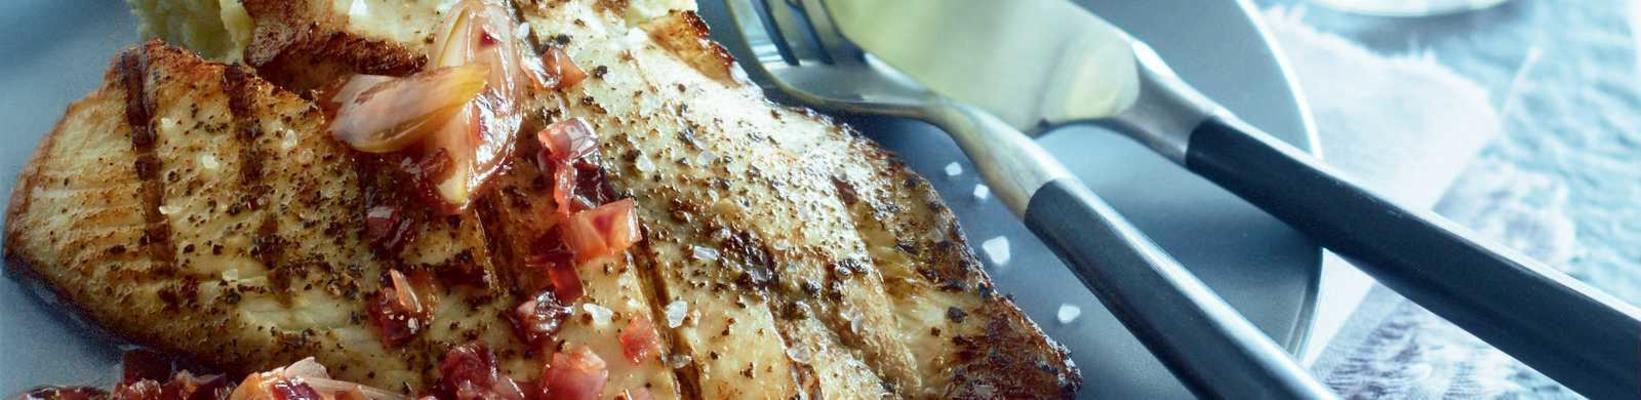 roasted tilapia with shallots compote